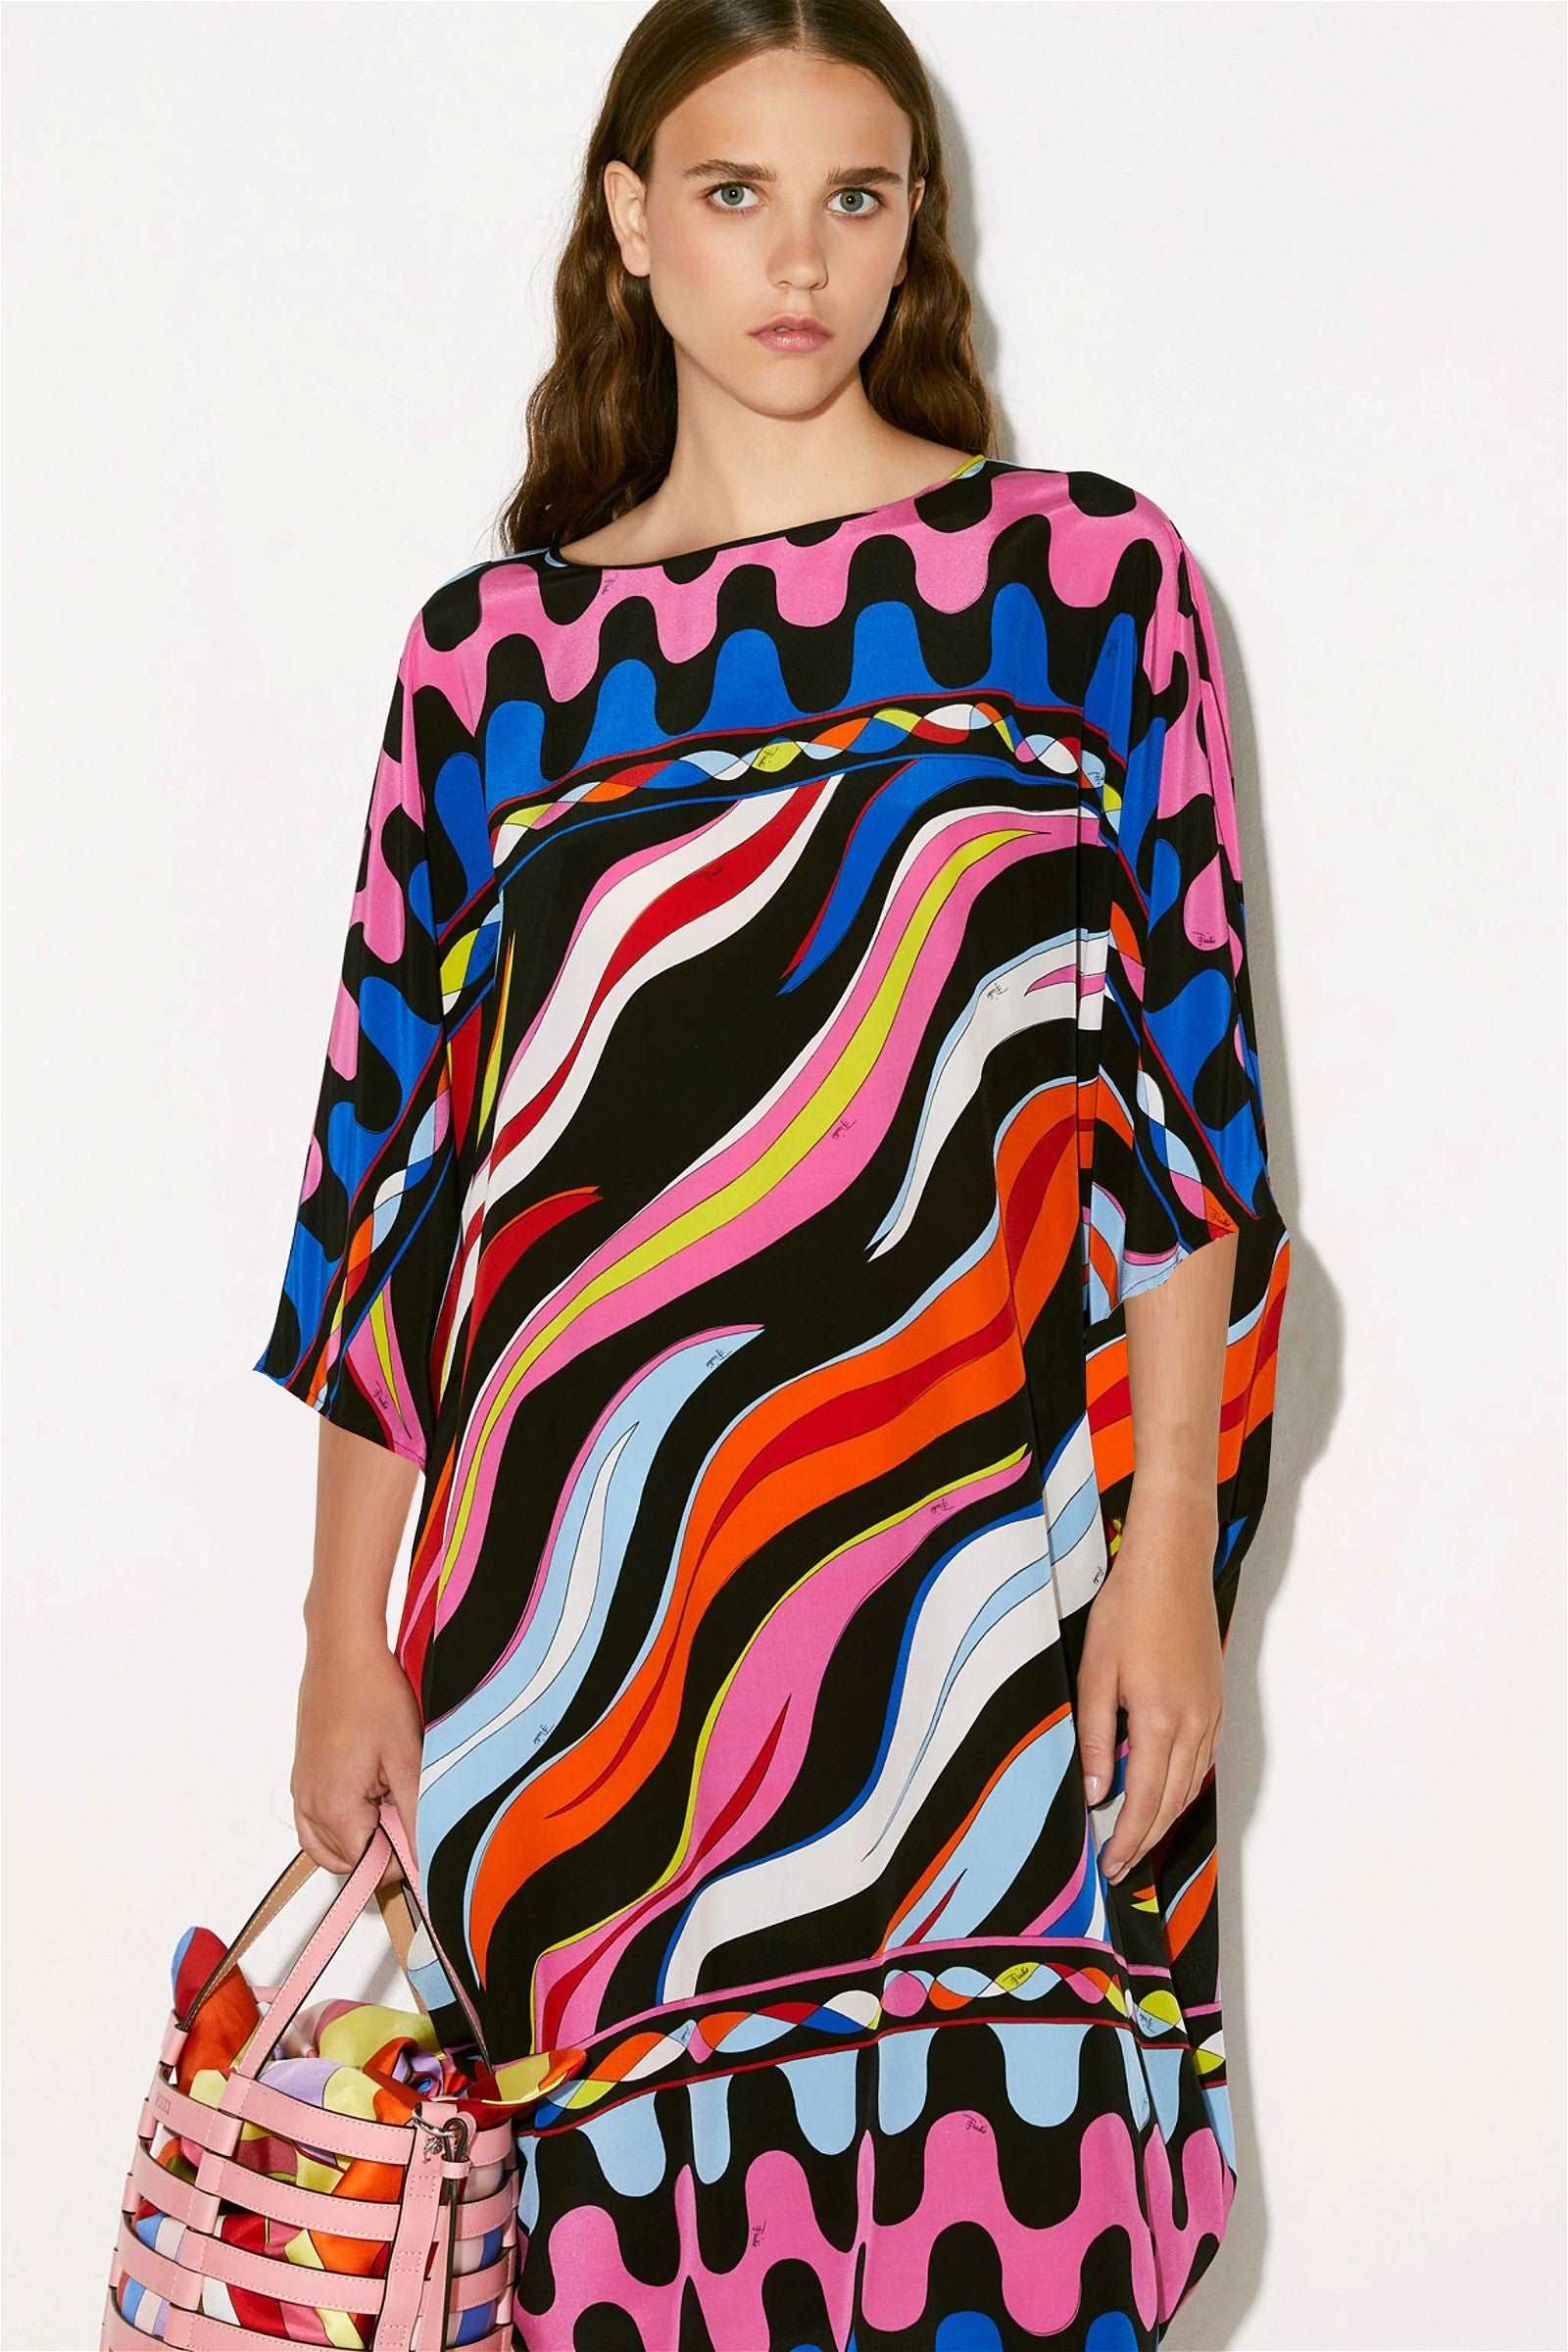 The model in the image is wearing Printed Colorful Kaftan in Silk Crepe Fabric from Alice Milan. Crafted with the finest materials and impeccable attention to detail, the Kaftan / Dress looks premium, trendy, luxurious and offers unparalleled comfort. It’s a perfect clothing option for loungewear, resort wear, party wear or for an airport look. The woman in the image looks happy, and confident with her style statement putting a happy smile on her face.